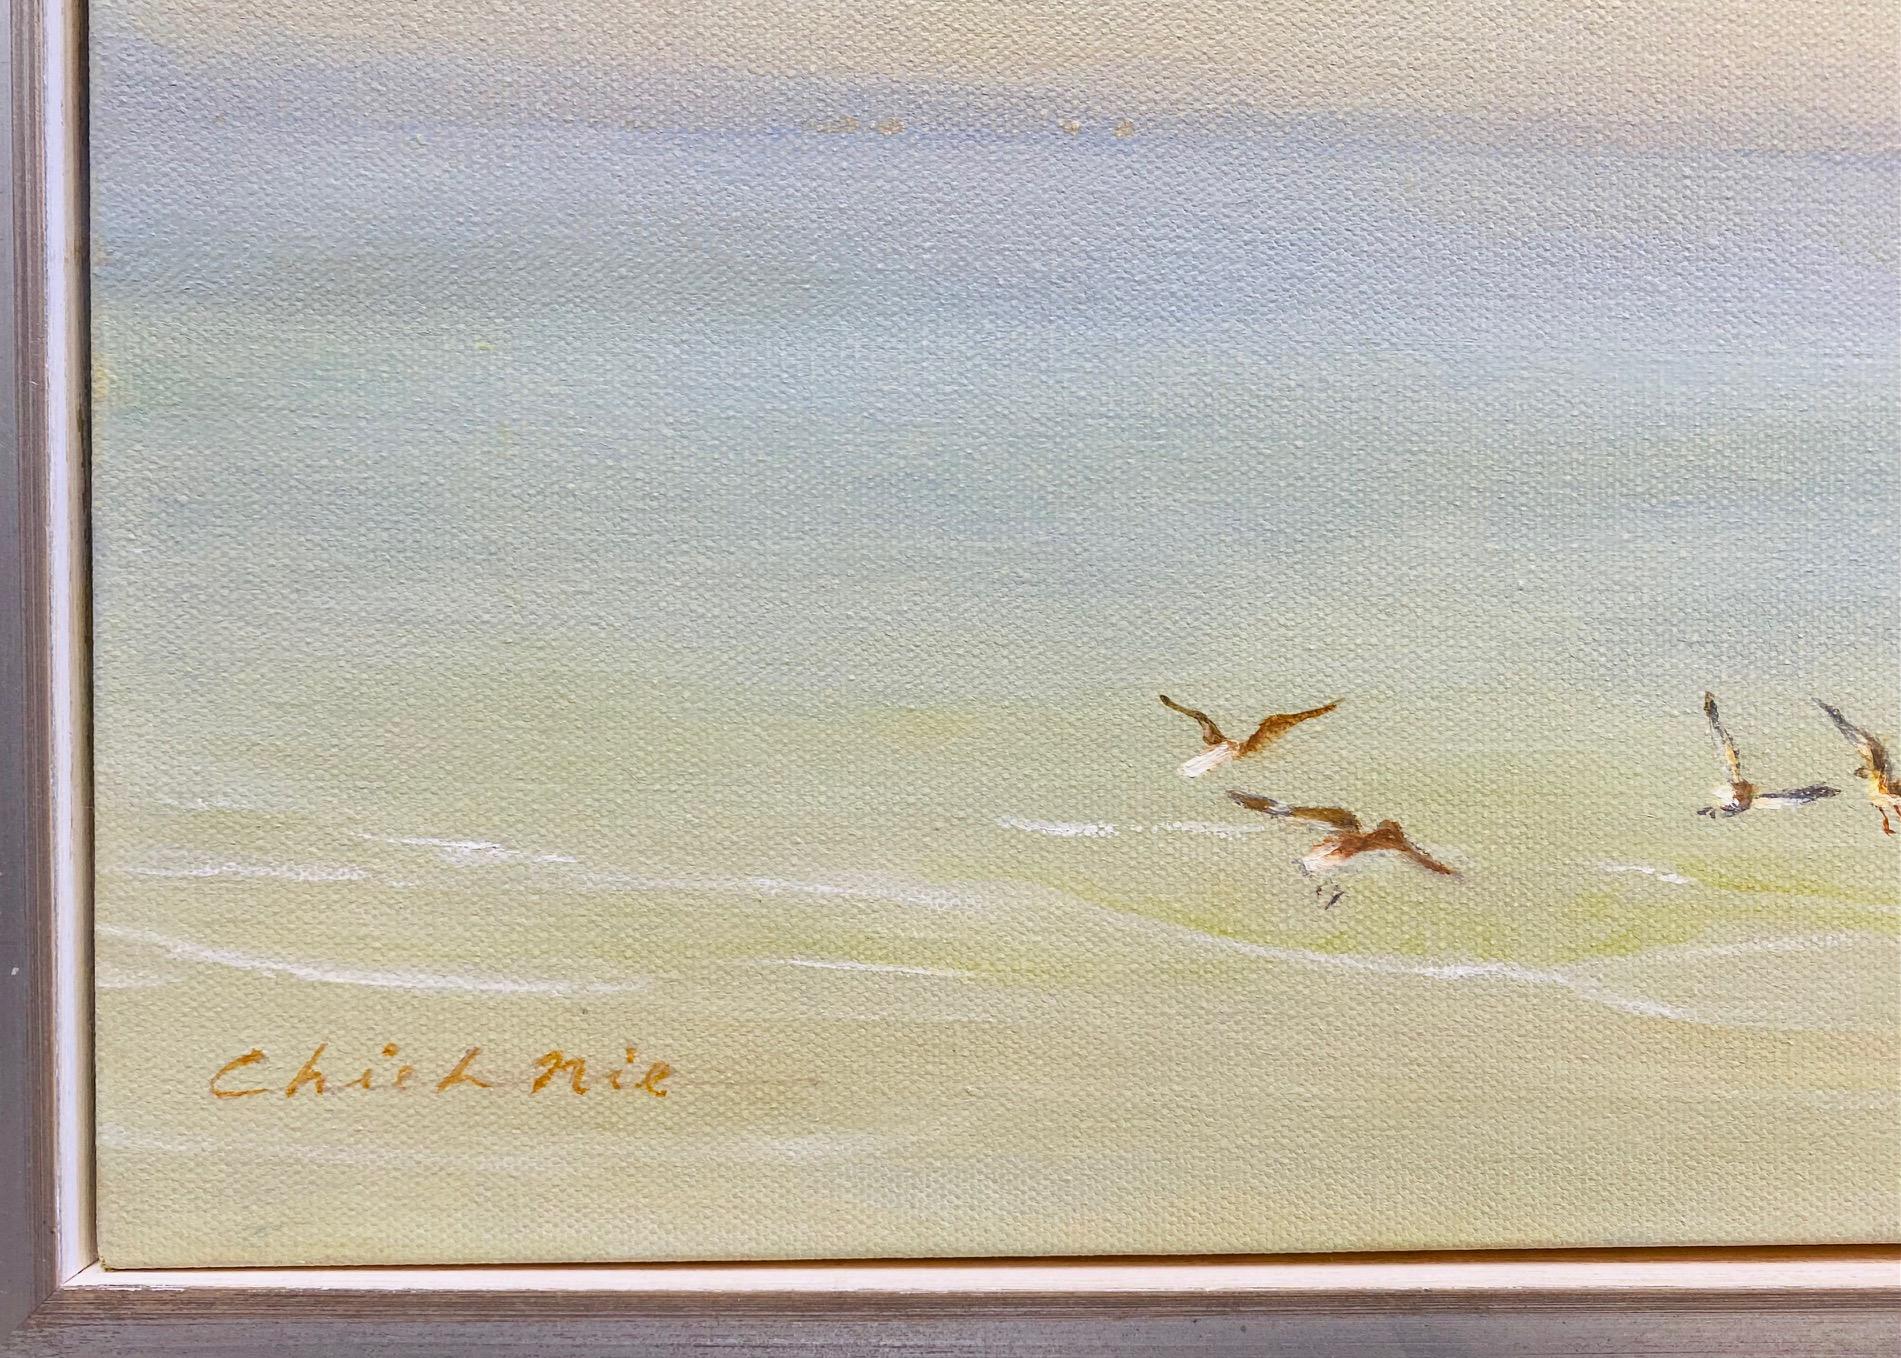 Peace and pristine natural beauty abounds in these seagulls in flight, gliding across the multicolored sky in this contemporary marine landscape.  The aquamarine sky is penetrated by the yellow sun rays but nothing can upstage the grace of a colony